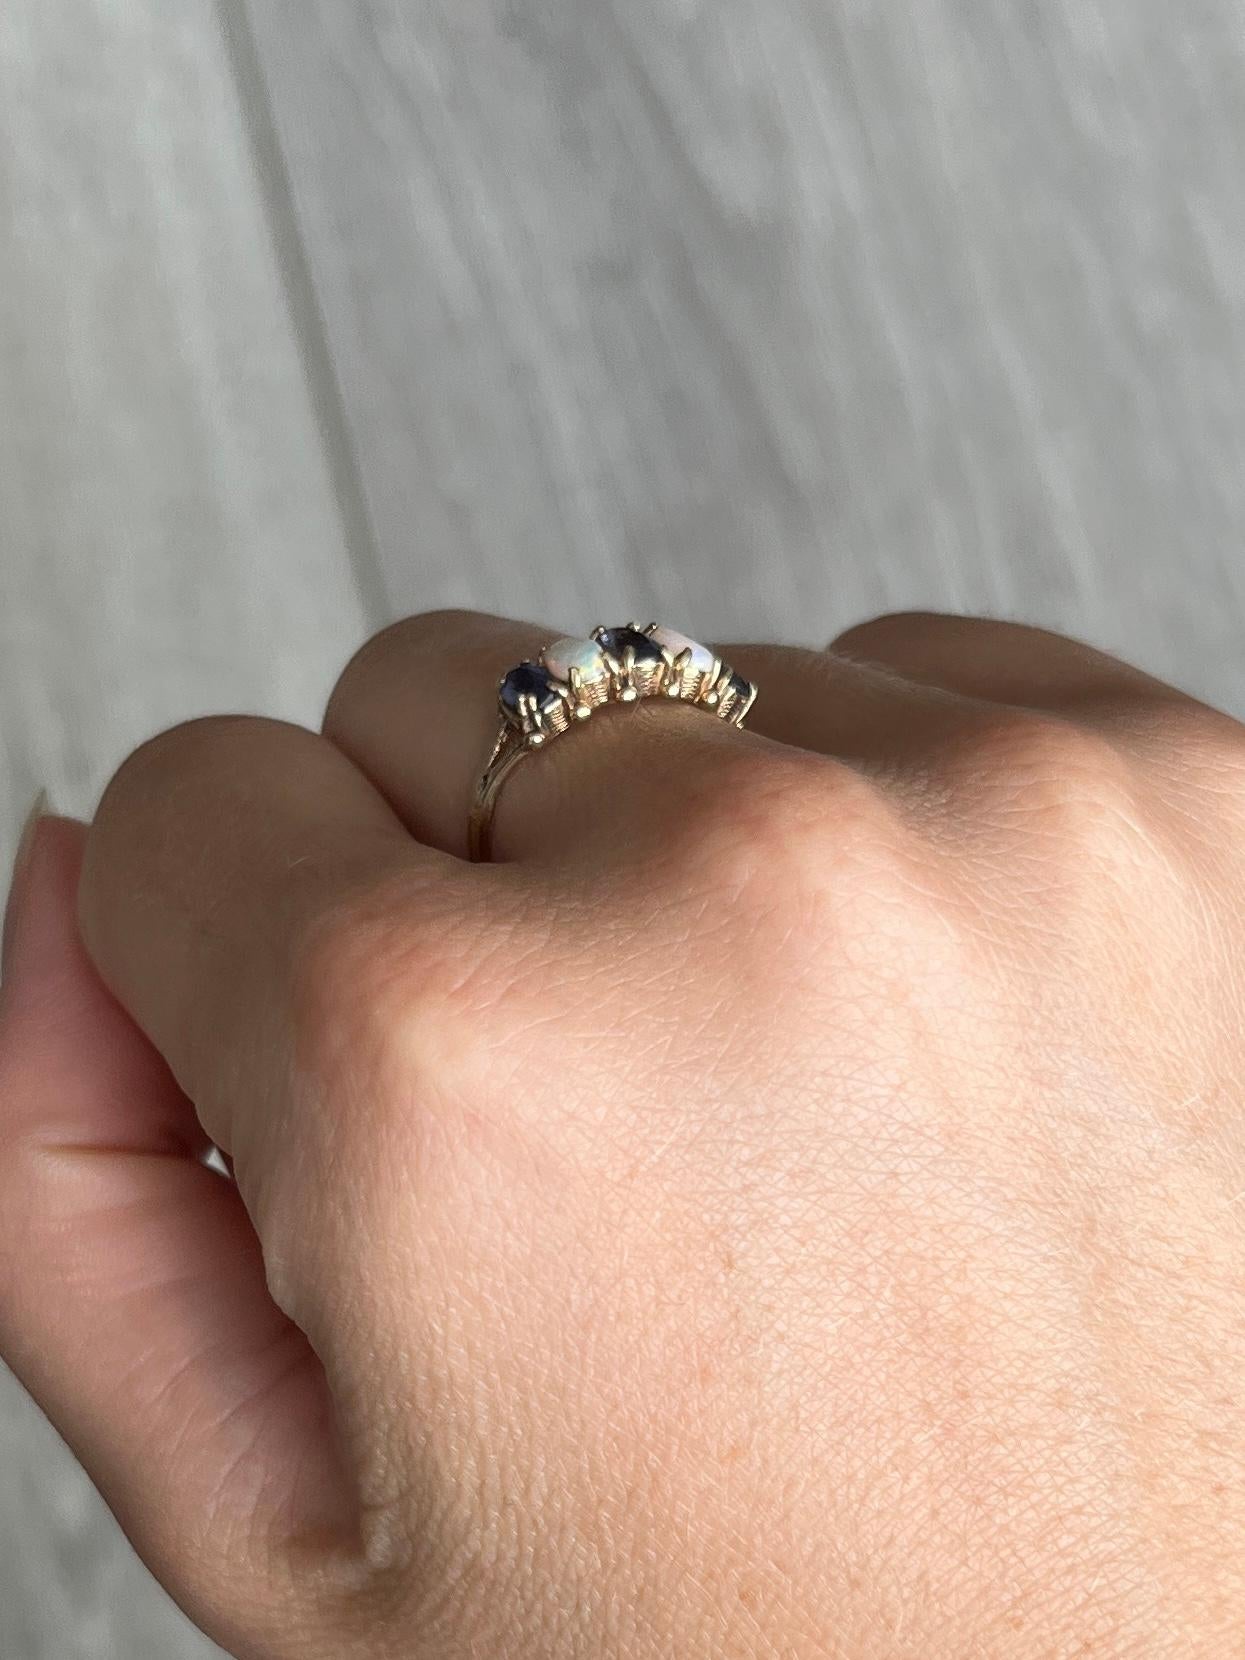 This gorgeous ring holds two opals and three amethyst stones. The ring is modelled in 9ct gold and the has split shoulders. 

Ring Size: M or 6 1/4
Widest Point: 6.5mm

Weight: 1.6g